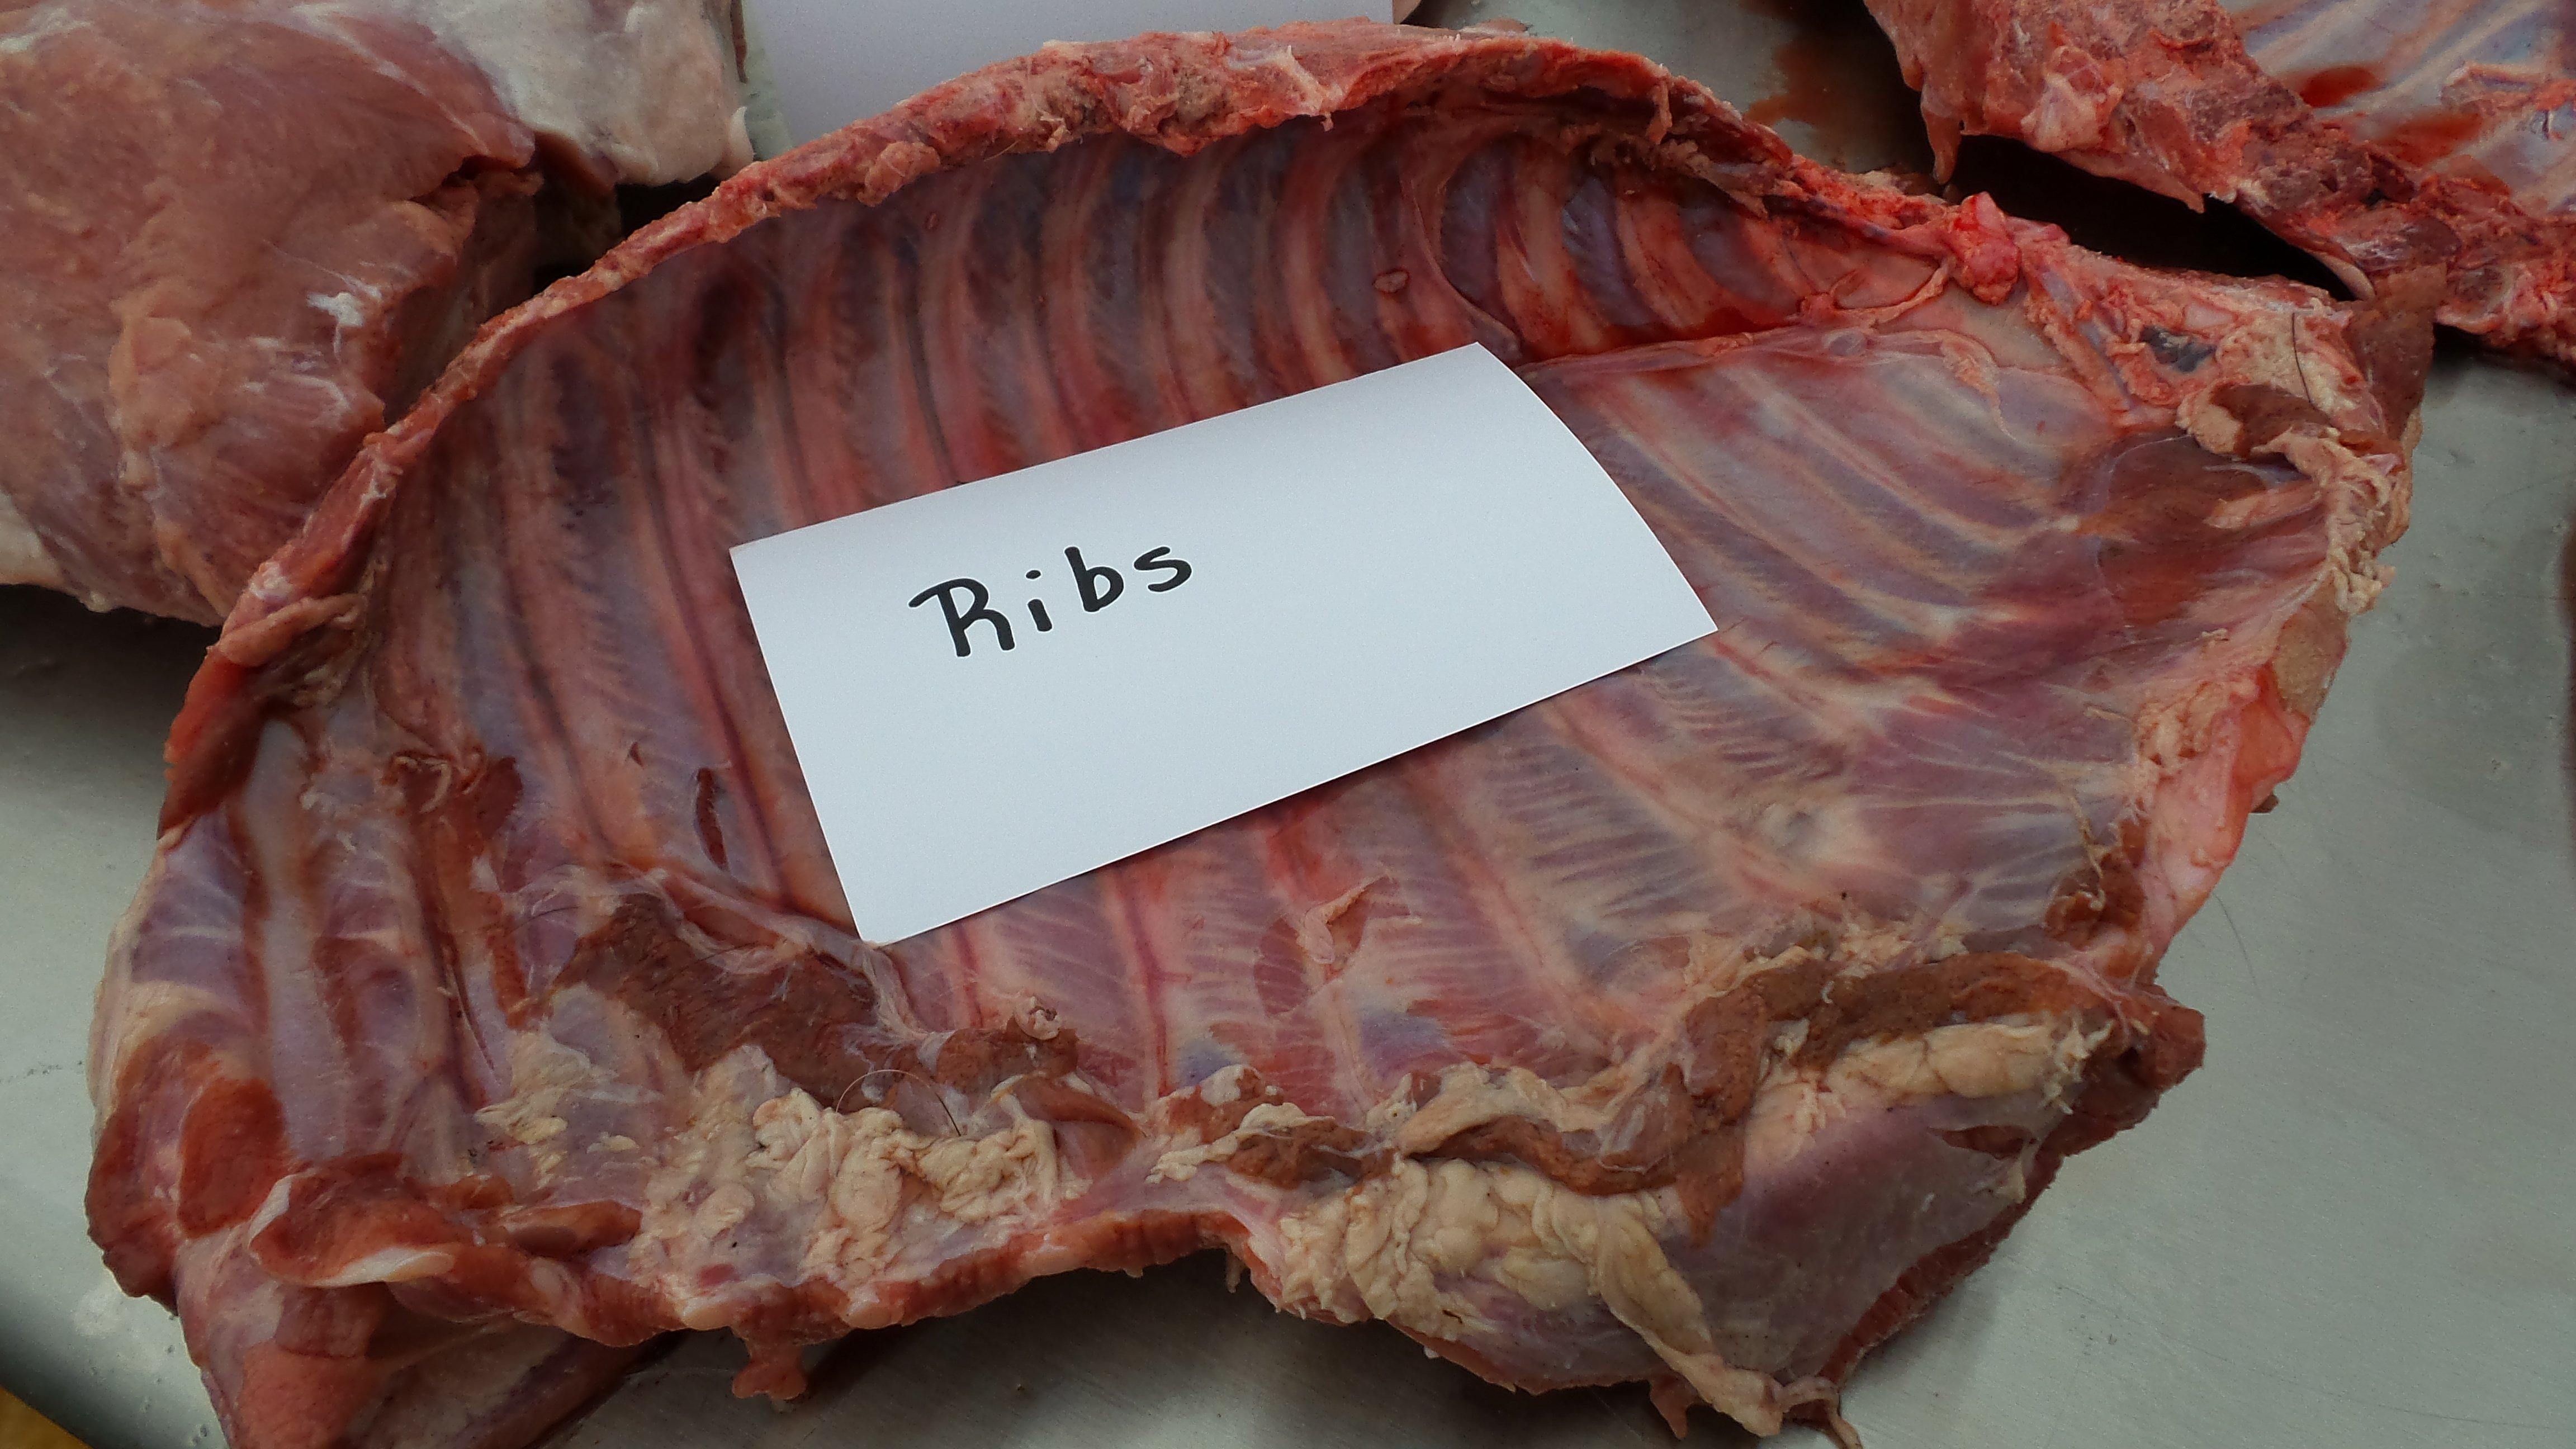 While small, wild pig ribs on the grill or smoker make excellent game day snacks.